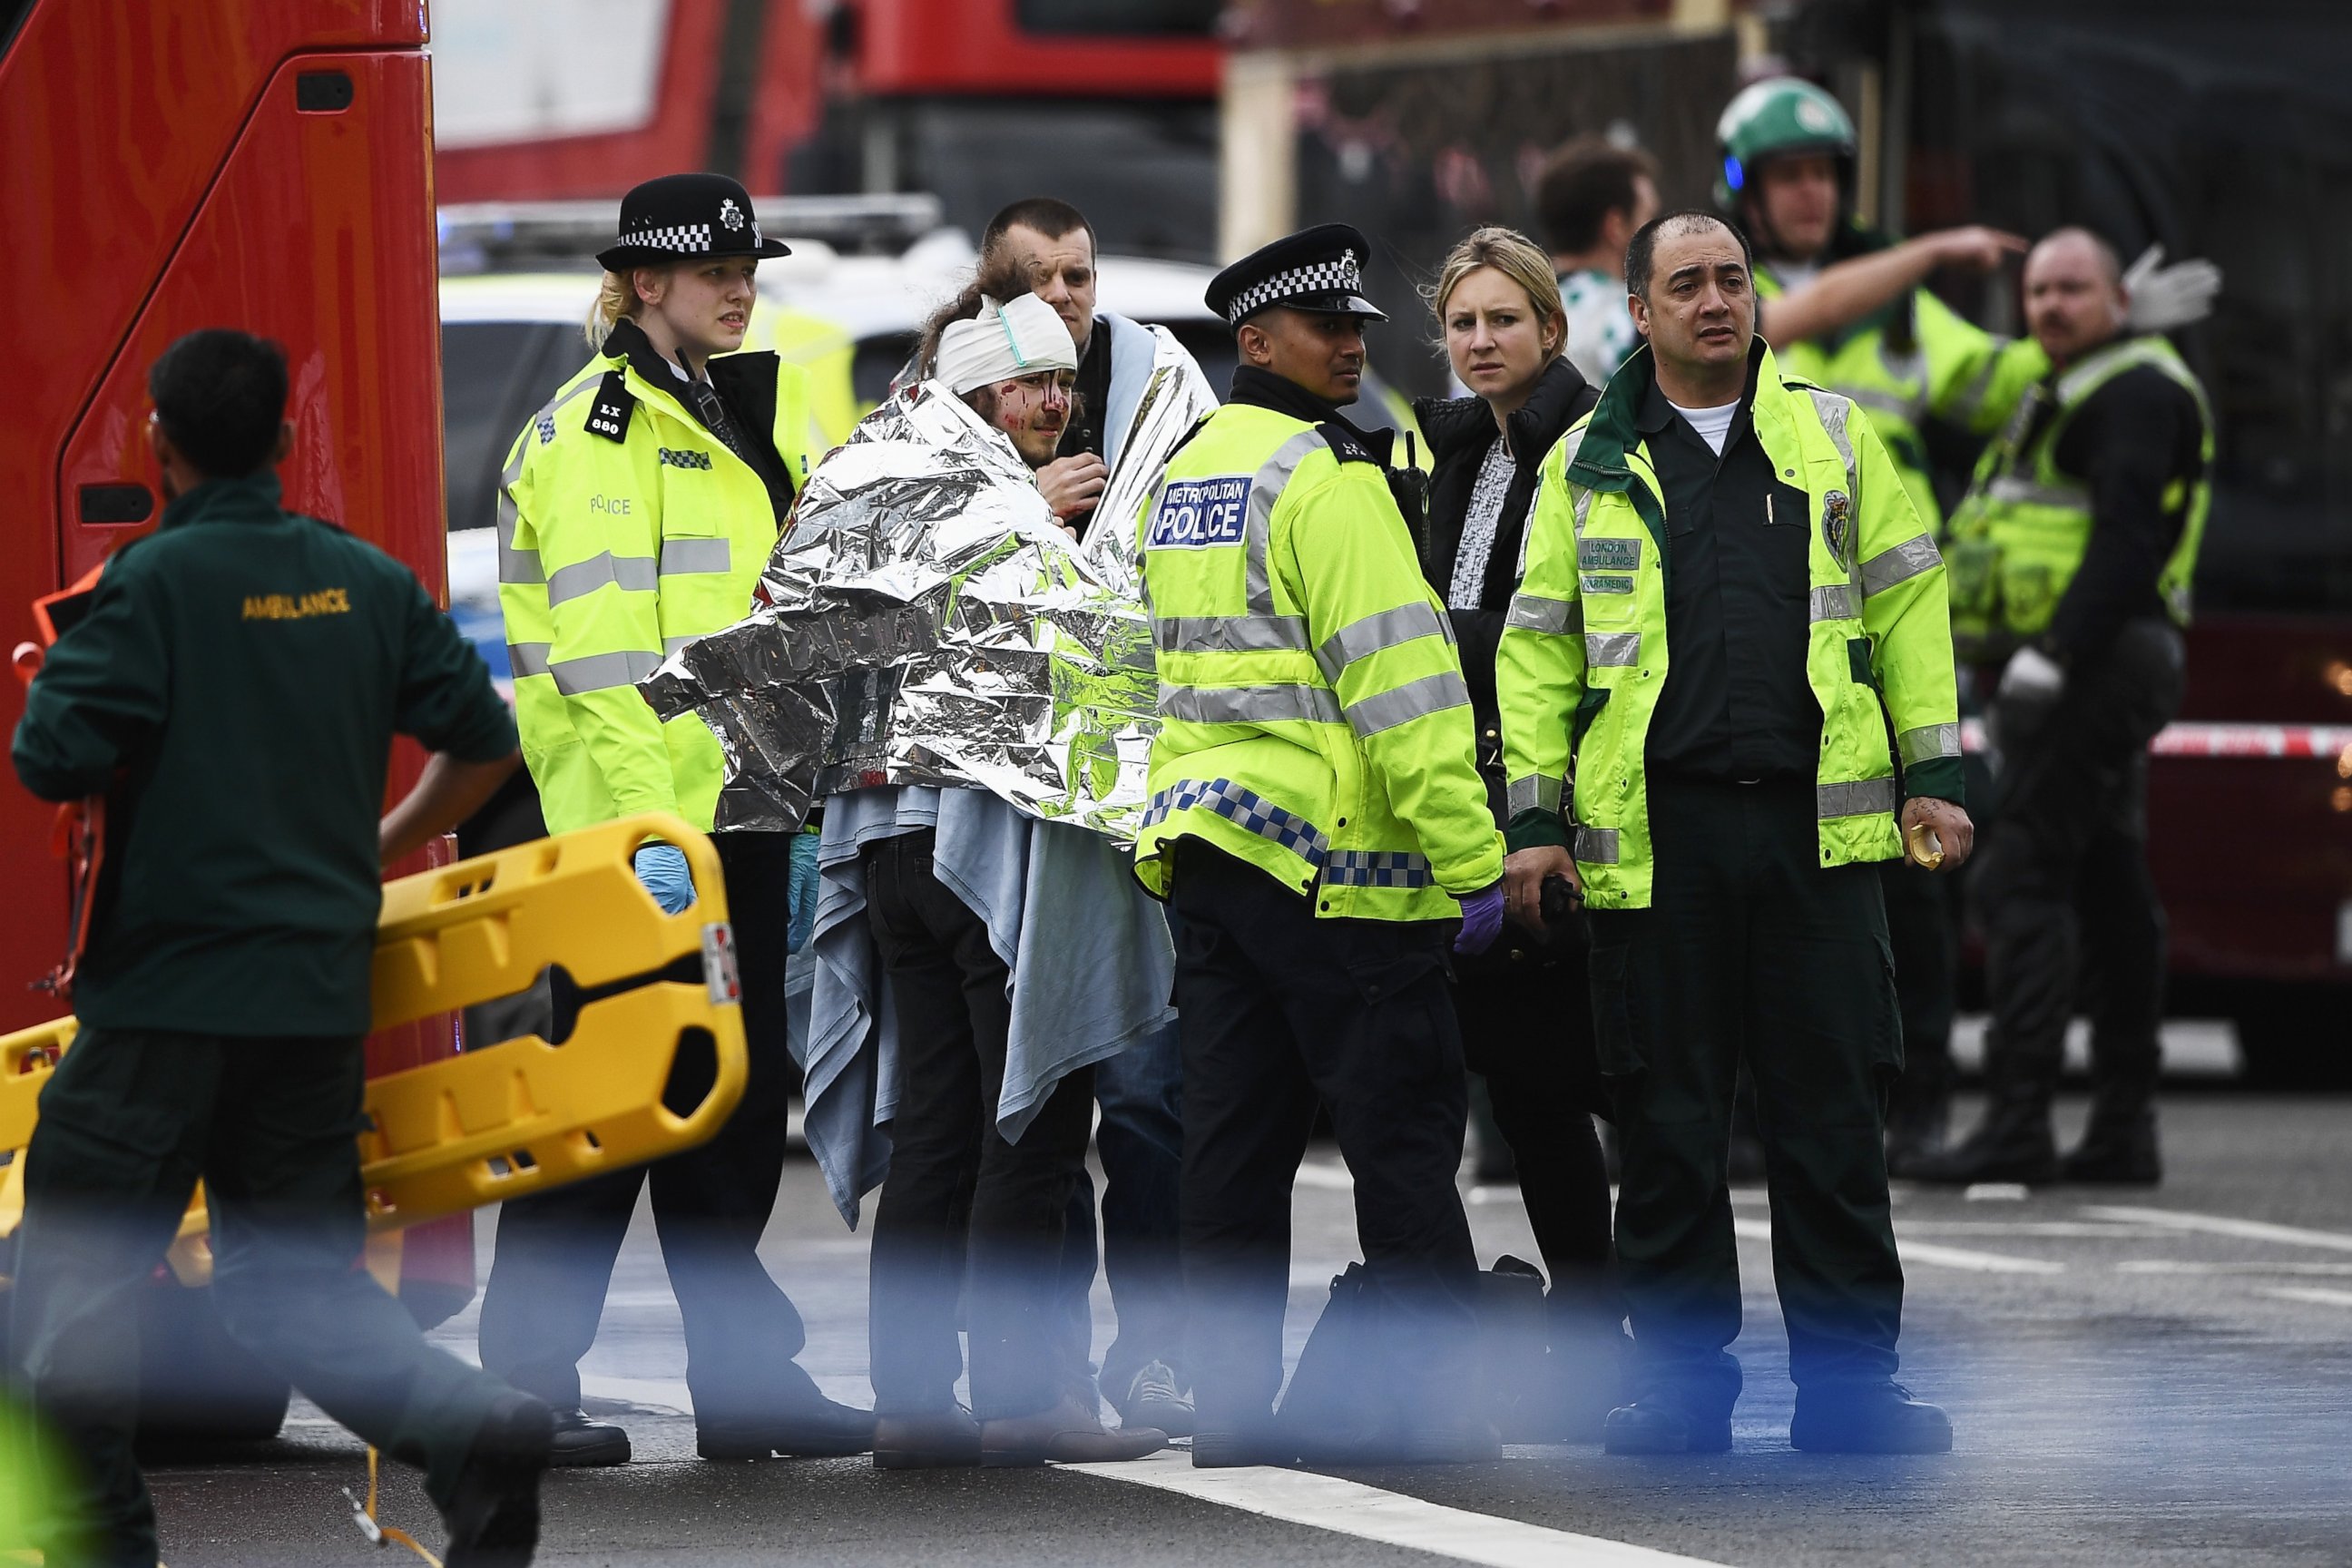 PHOTO: A member of the public is treated by emergency services near Westminster Bridge and the Houses of Parliament on March 22, 2017 in London.